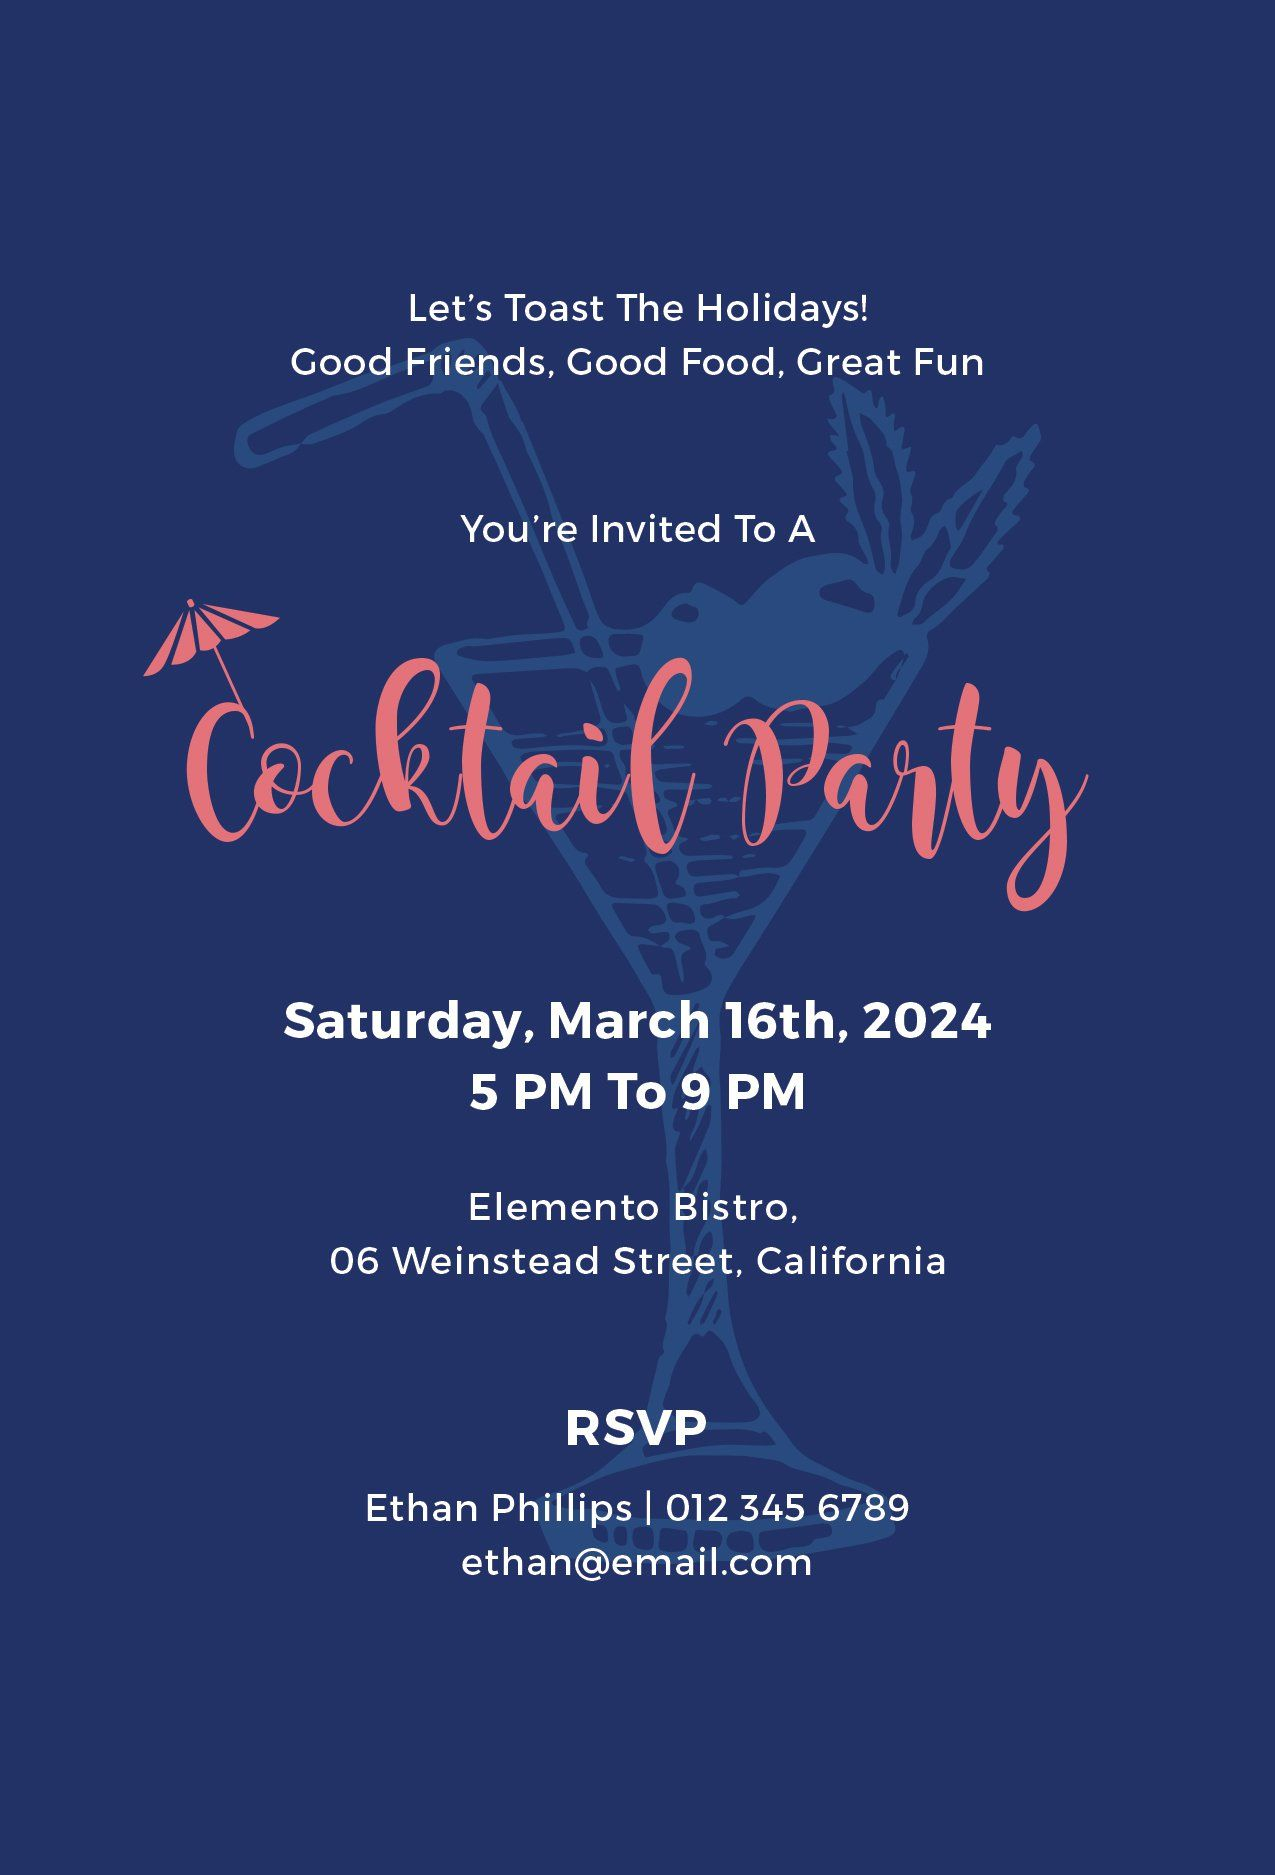 Free Cocktail Party Invitation Flyer Ideas Cocktail Party inside measurements 1275 X 1875